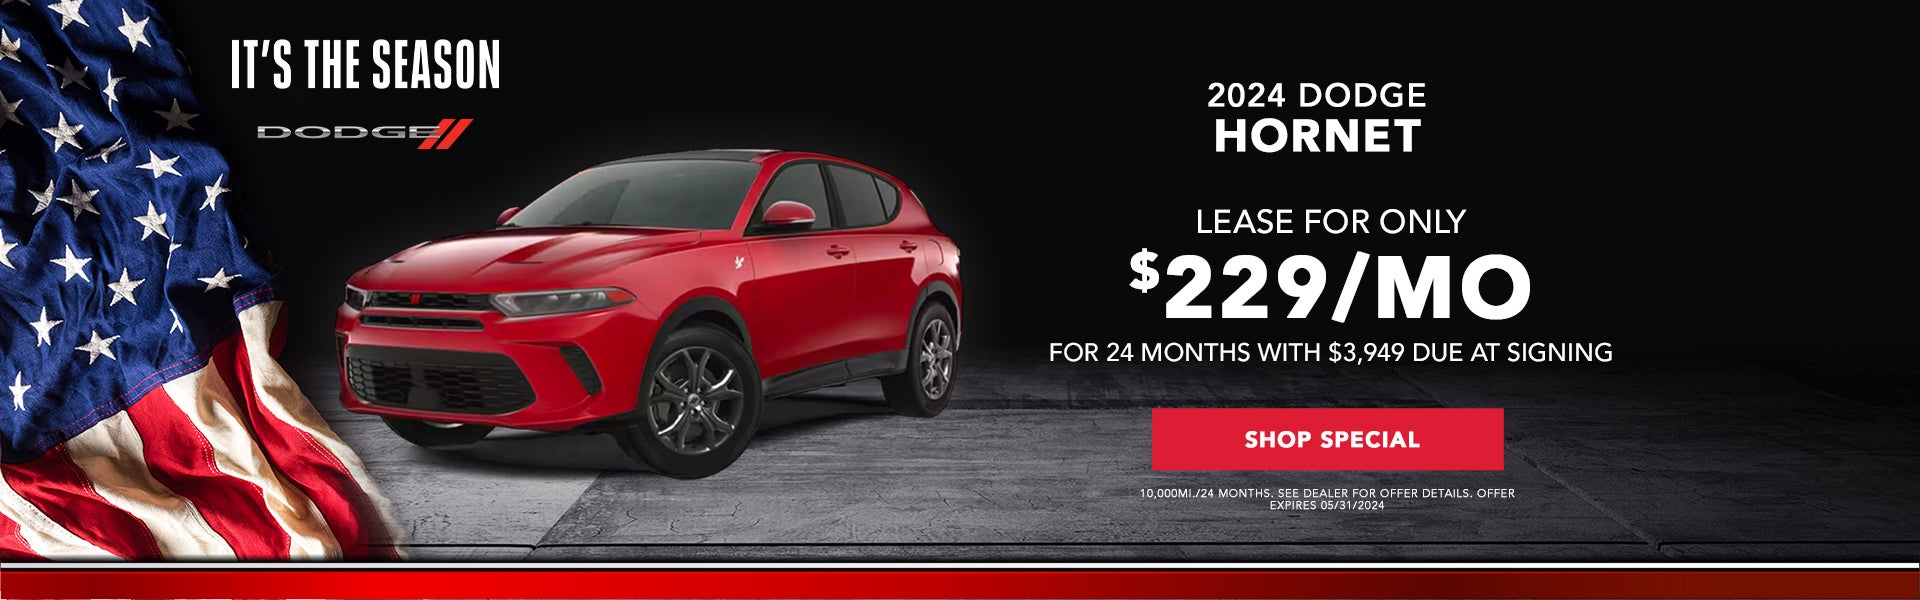 Lease a 2024 Dodge Hornet for only $229/Mo for 24 Months